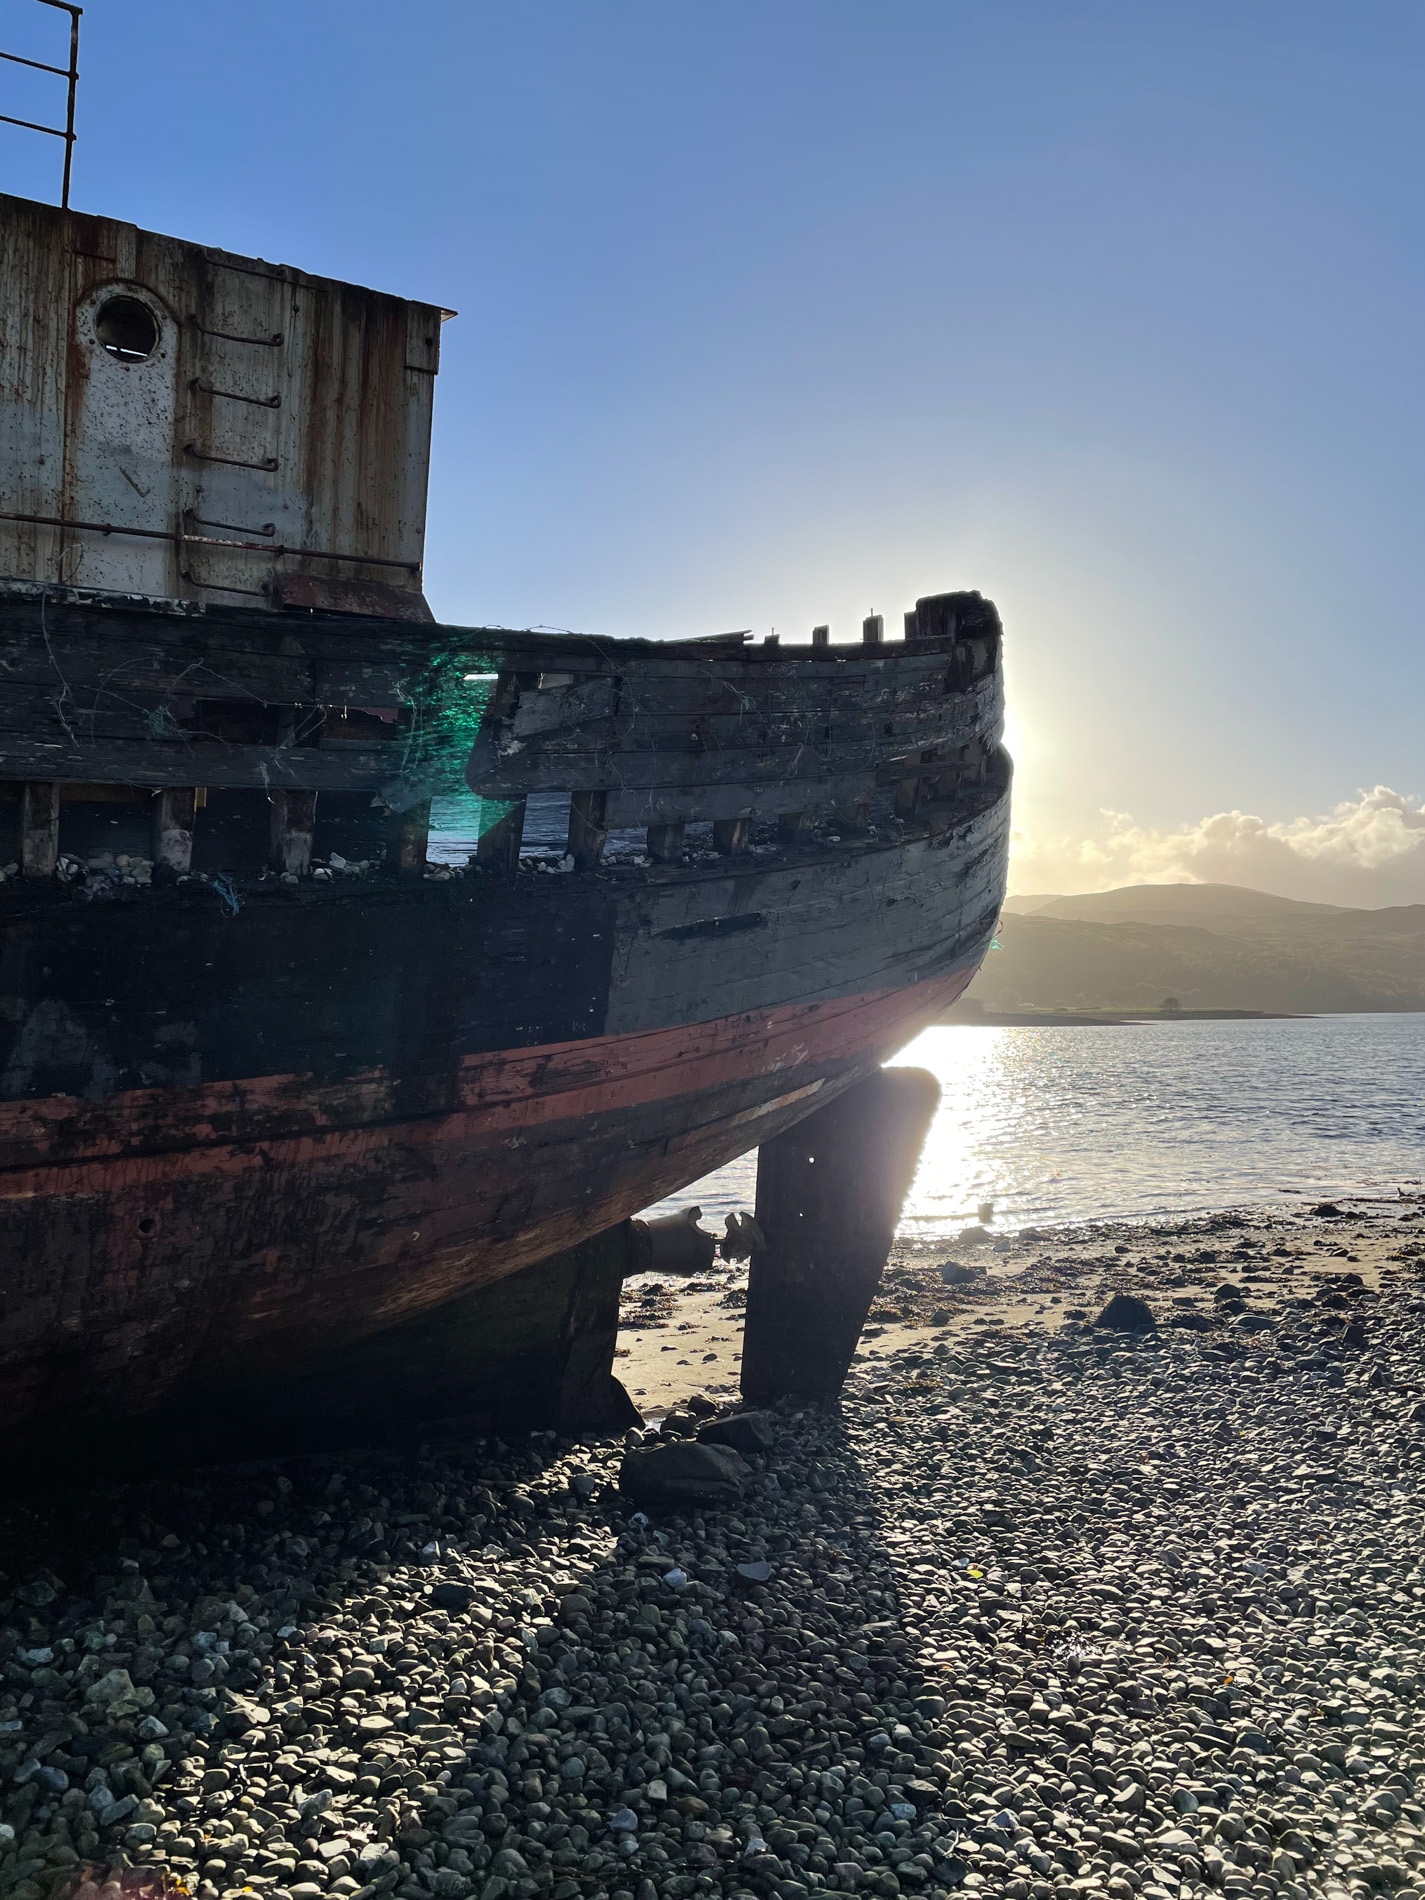 The Corpach Shipwreck in the golden hour